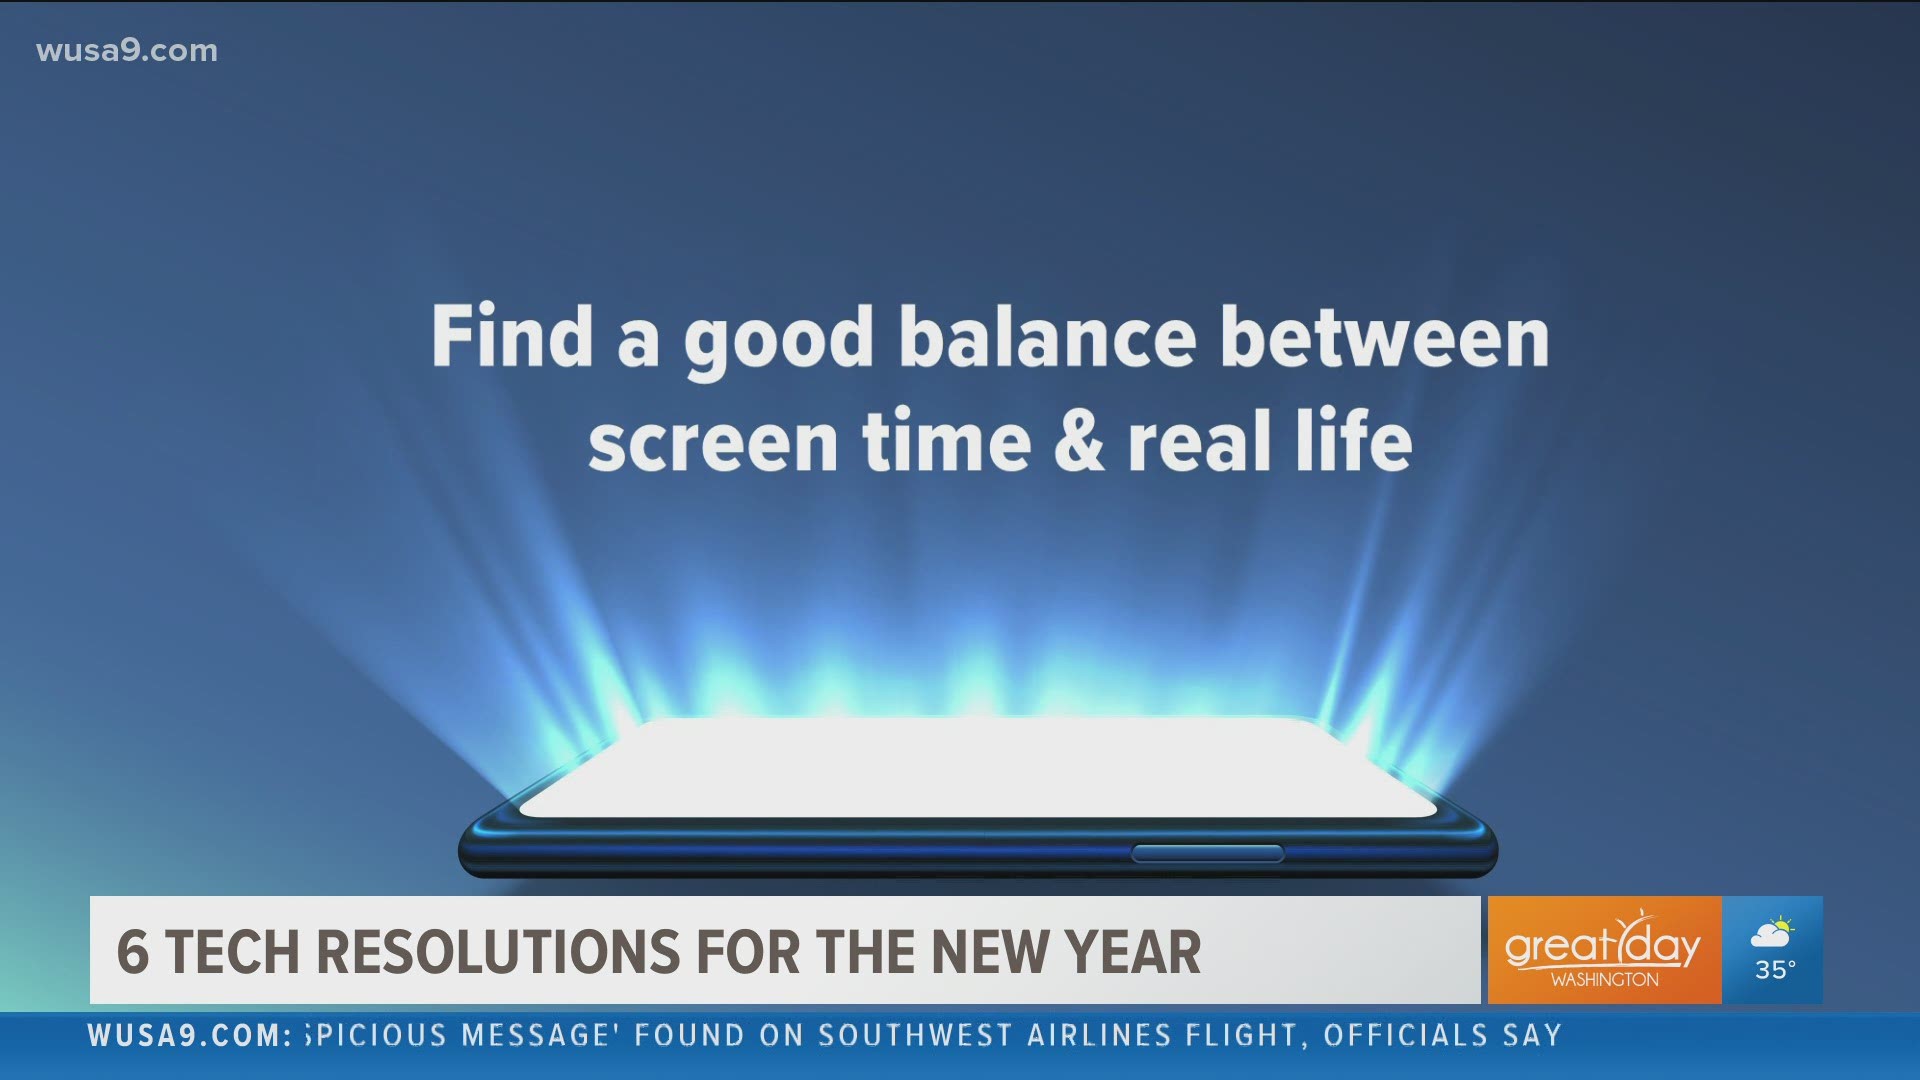 Technology expert Burton Kelso shares some resolutions to help simplify your digital life.